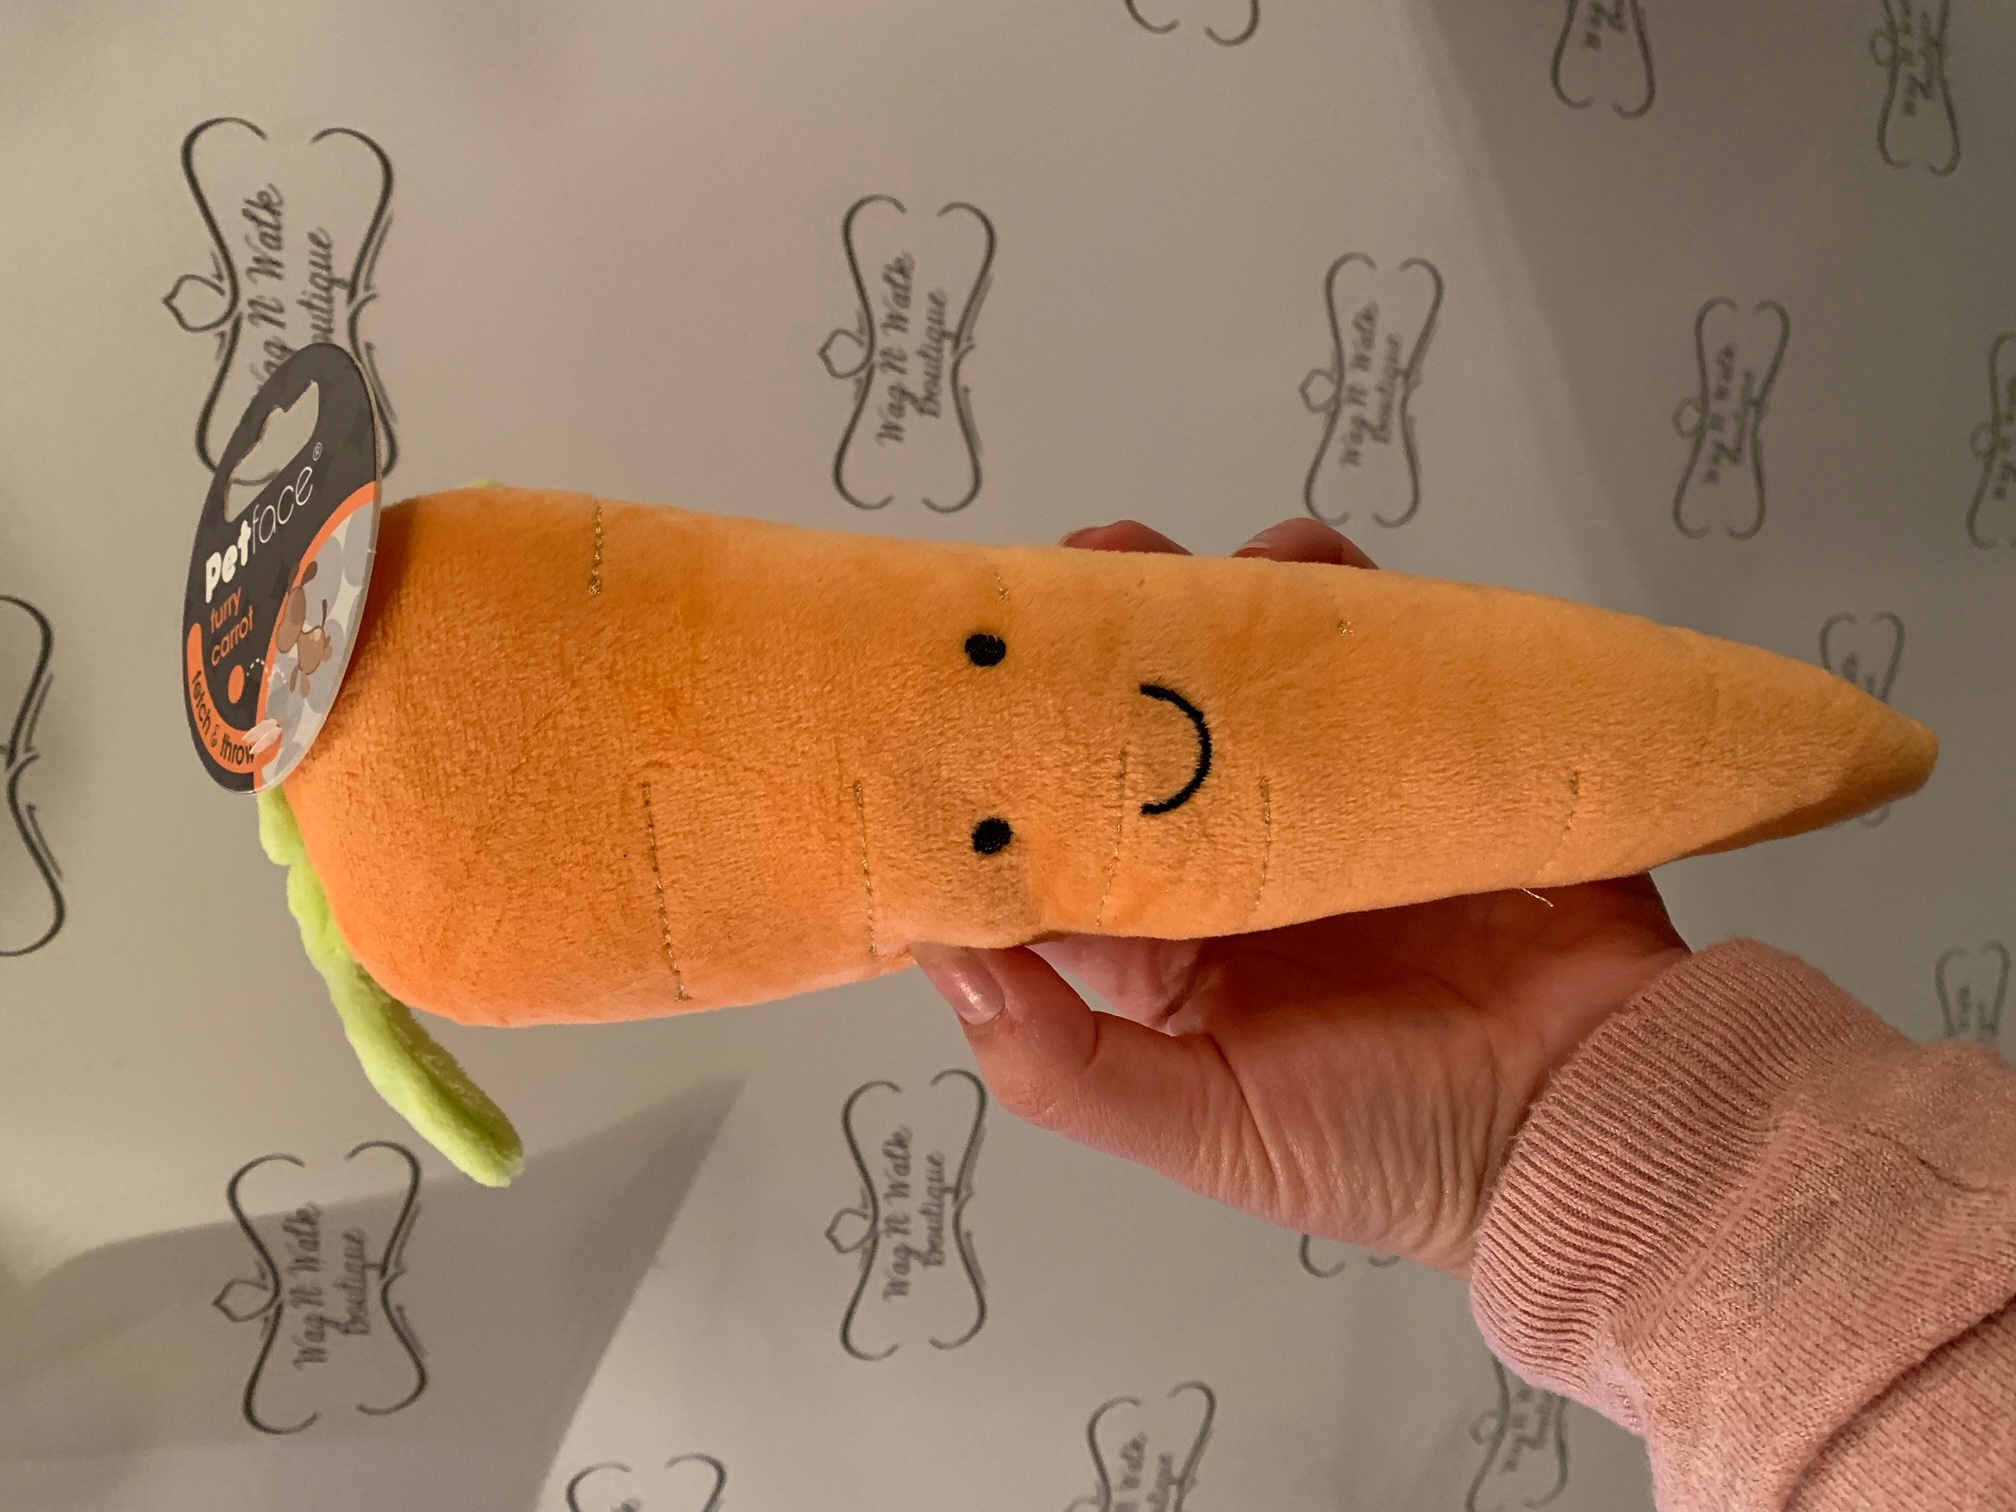 Kevin the Fluffy Carrot